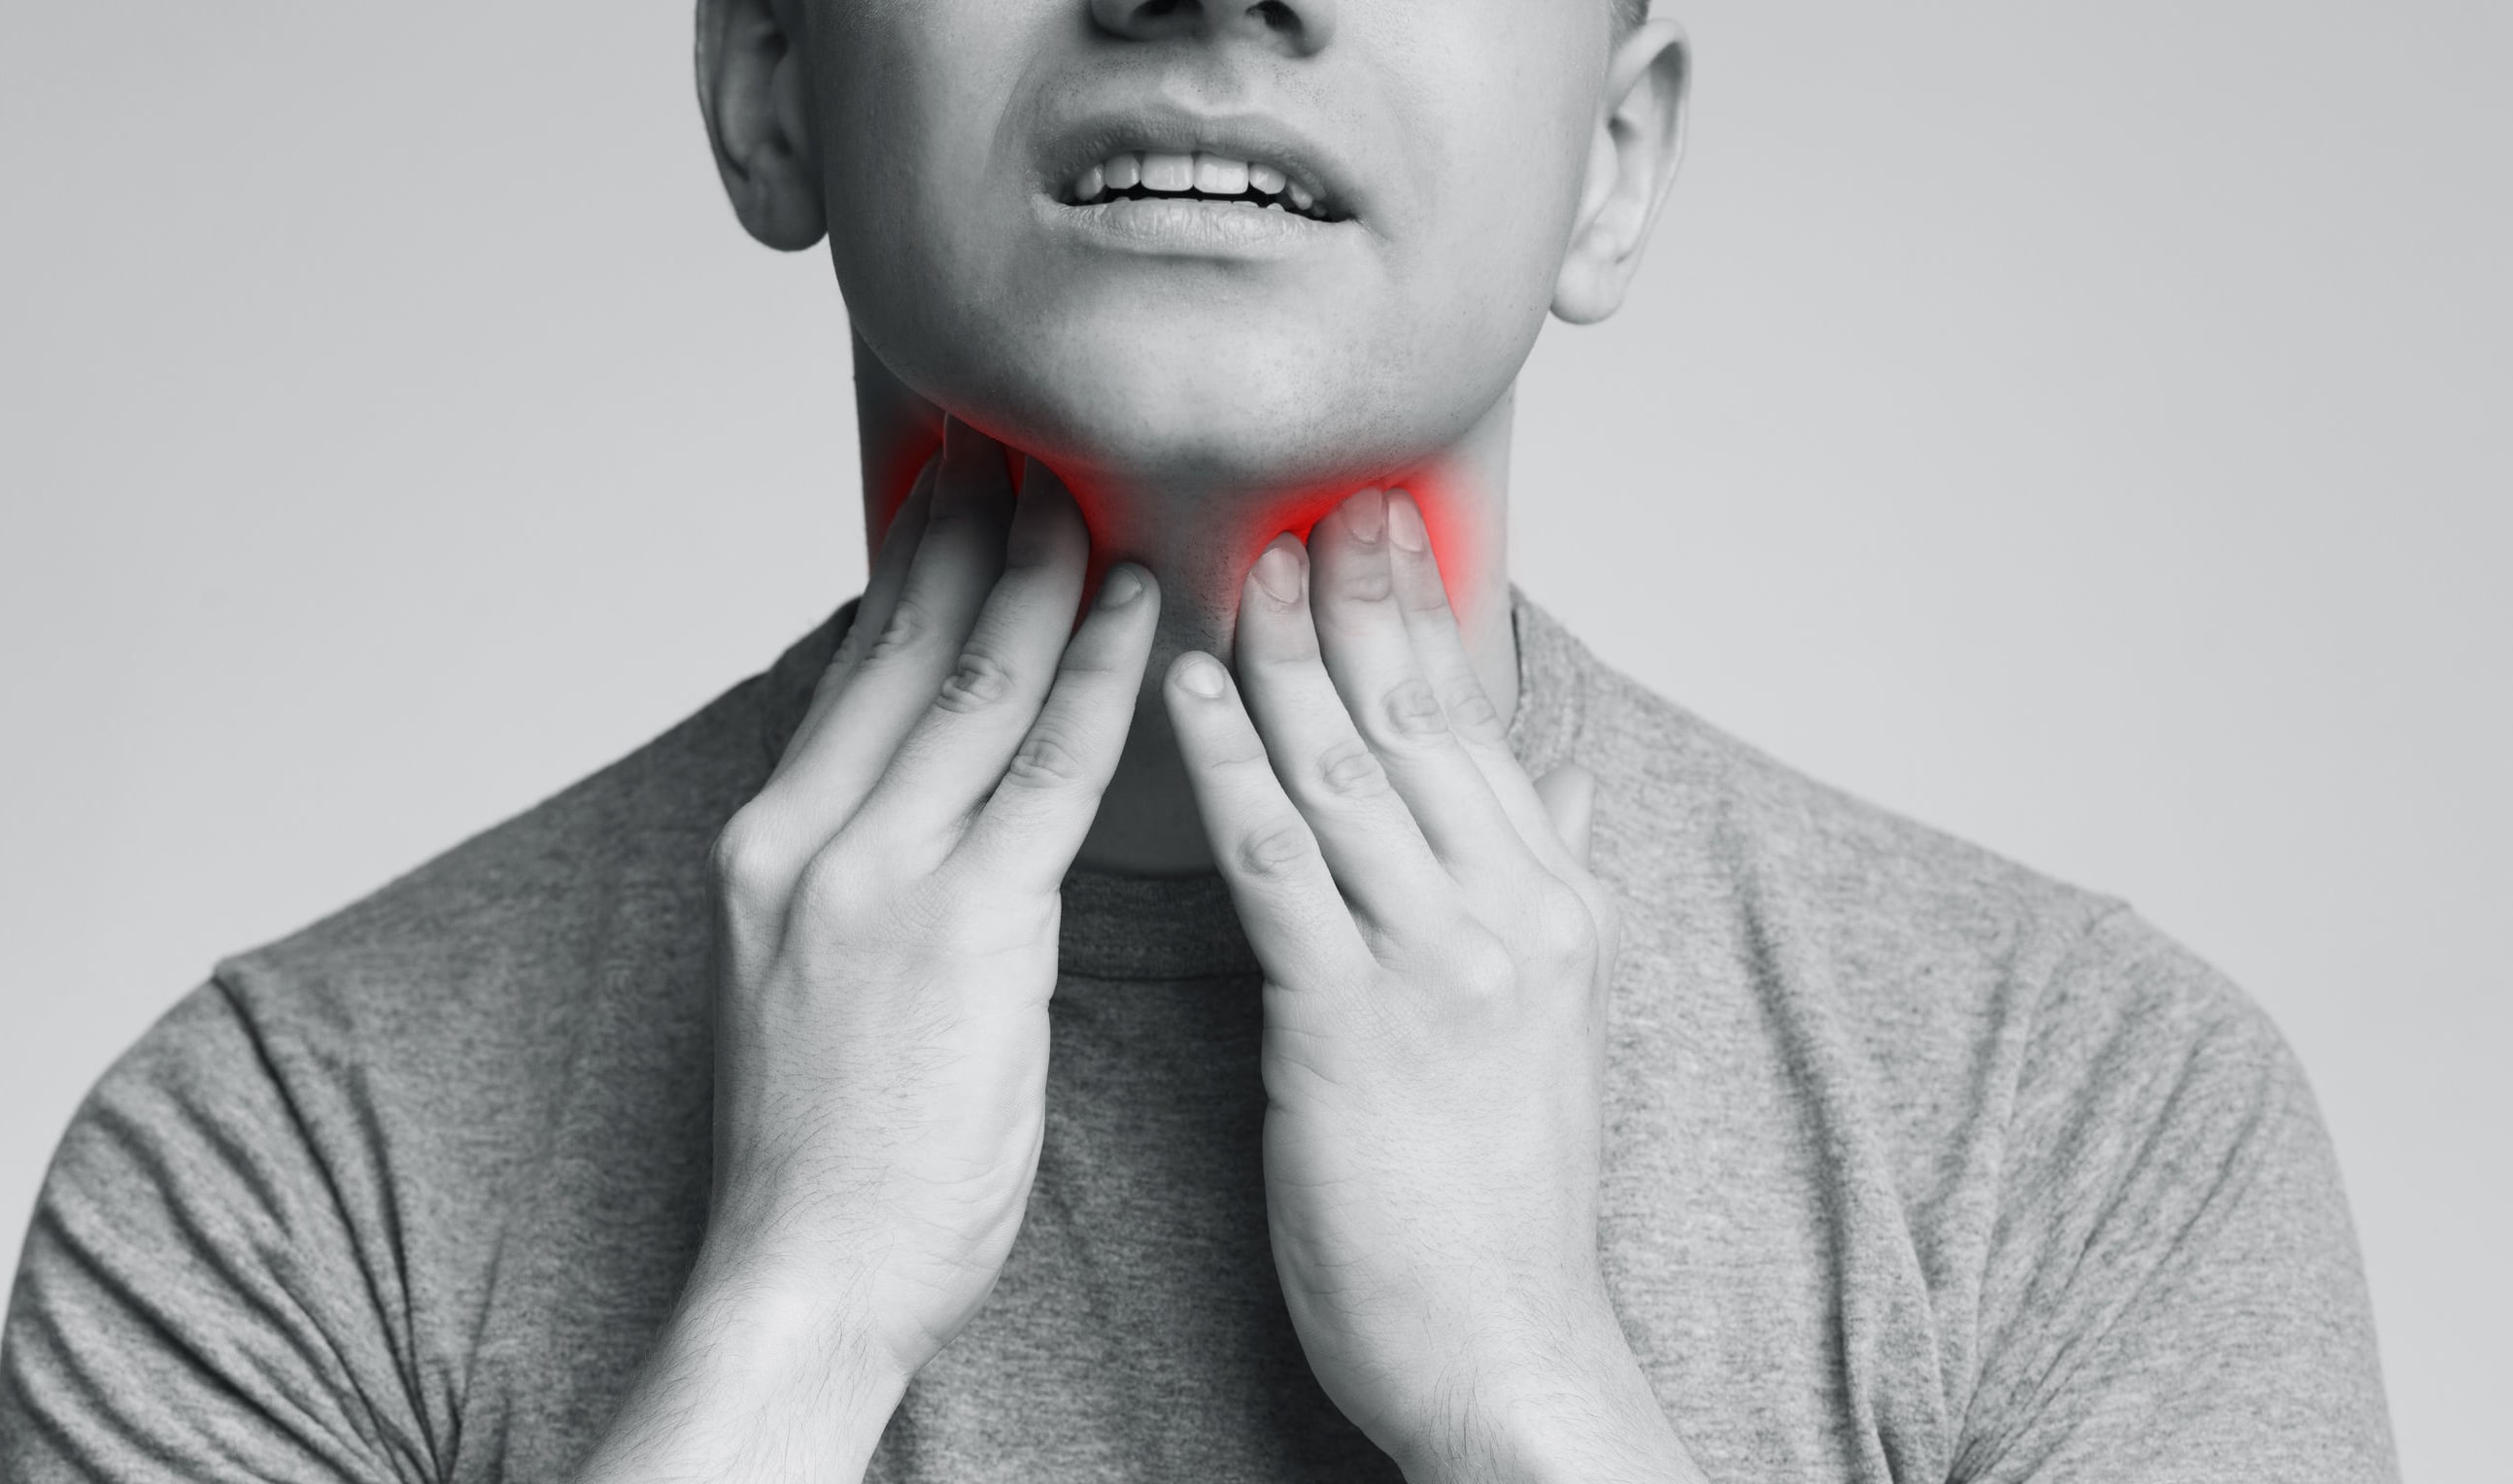 Man with thyroid gland problem, touching his neck.